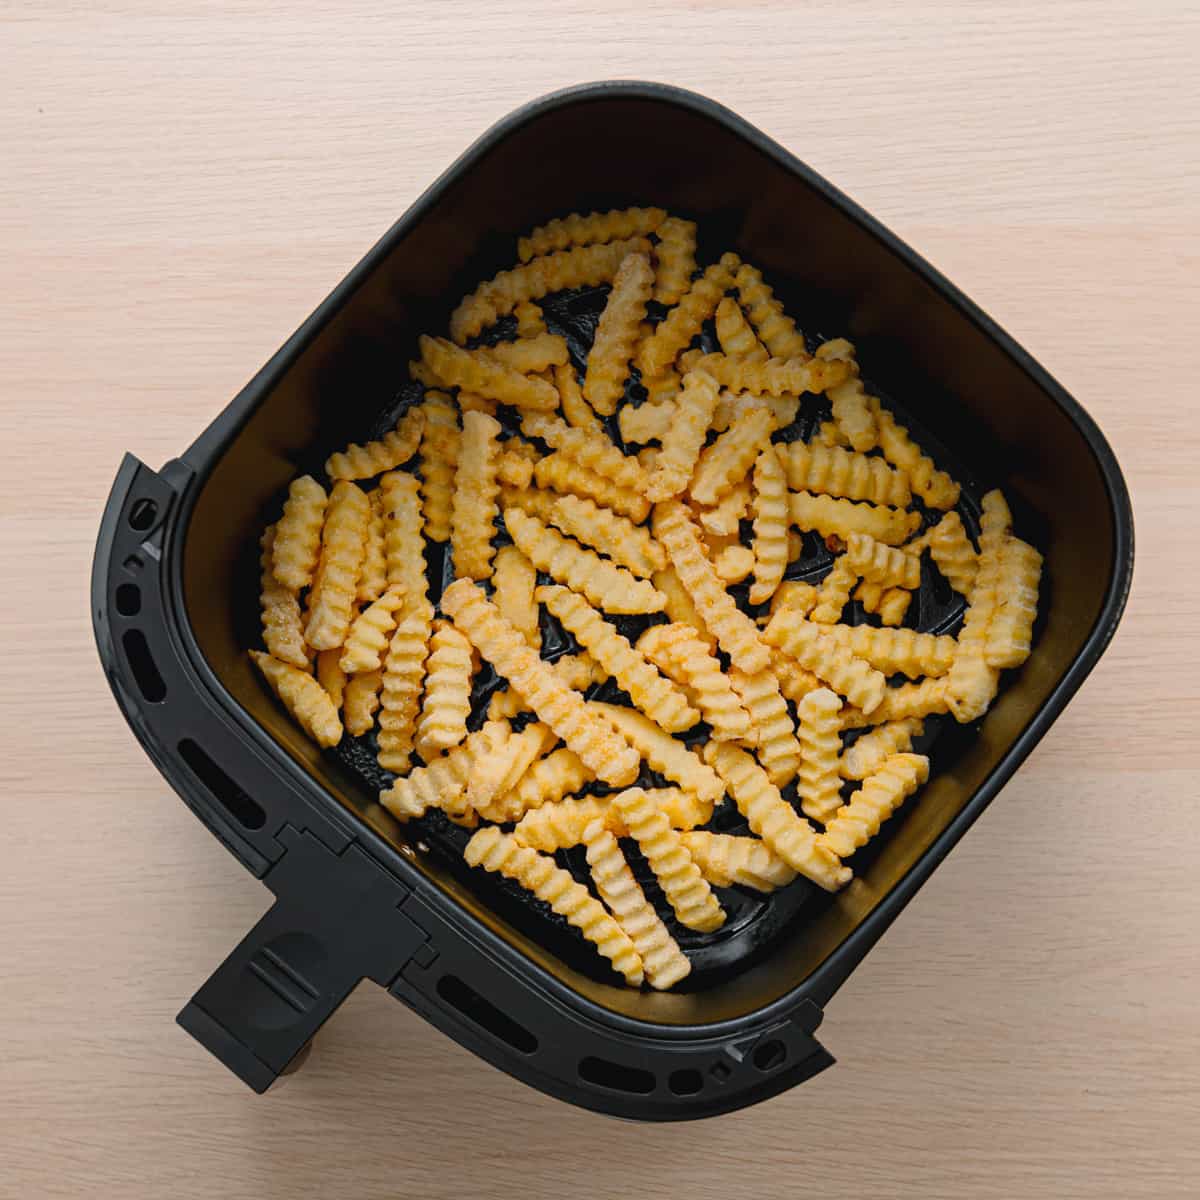 How to Cook Frozen Fries in an Air Fryer